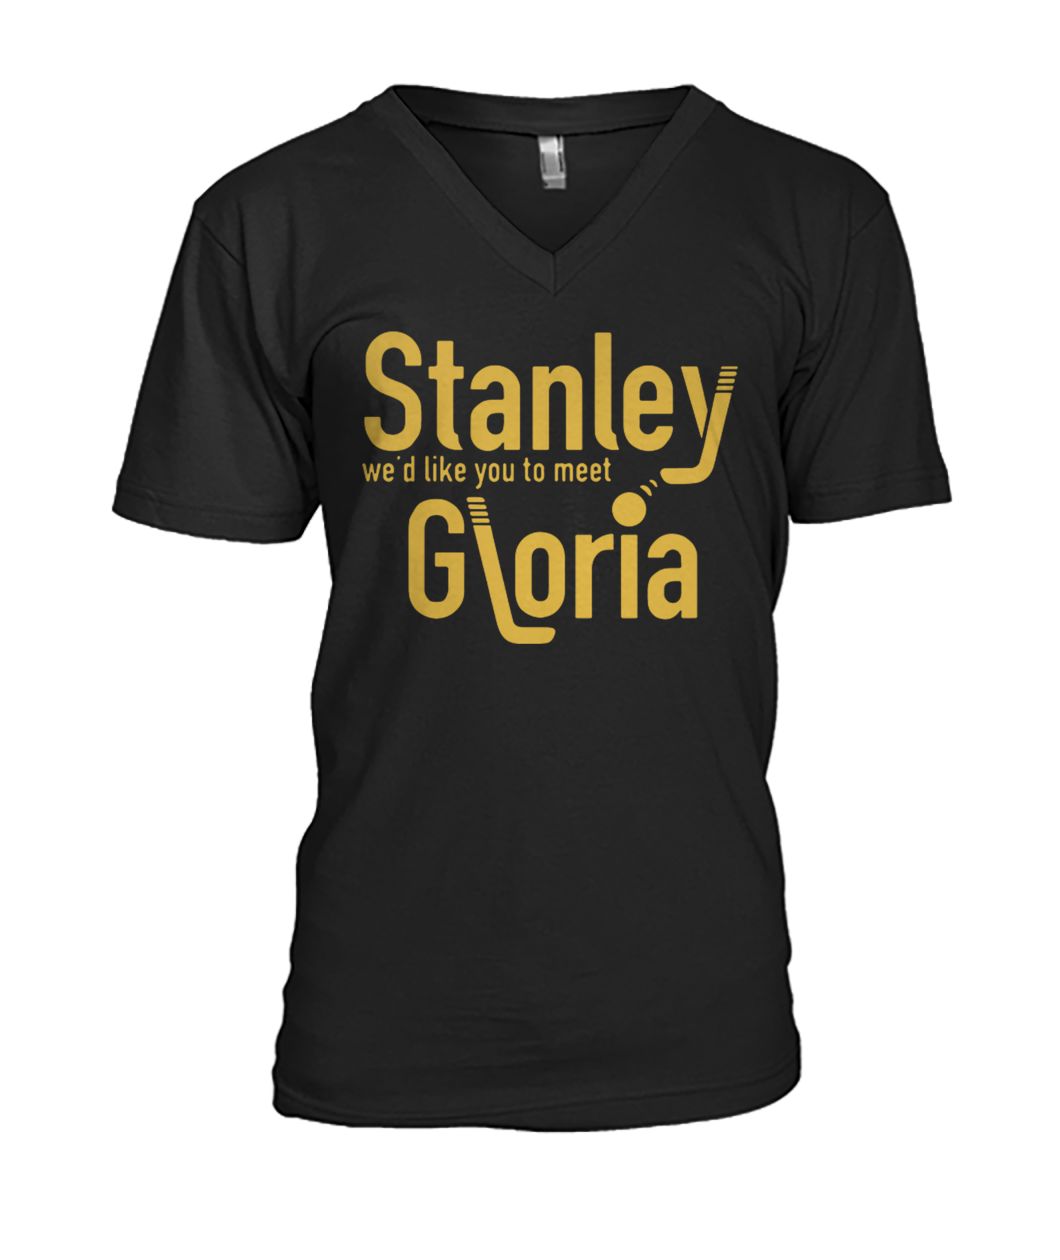 Stanley we'd like you to meet gloria mens v-neck